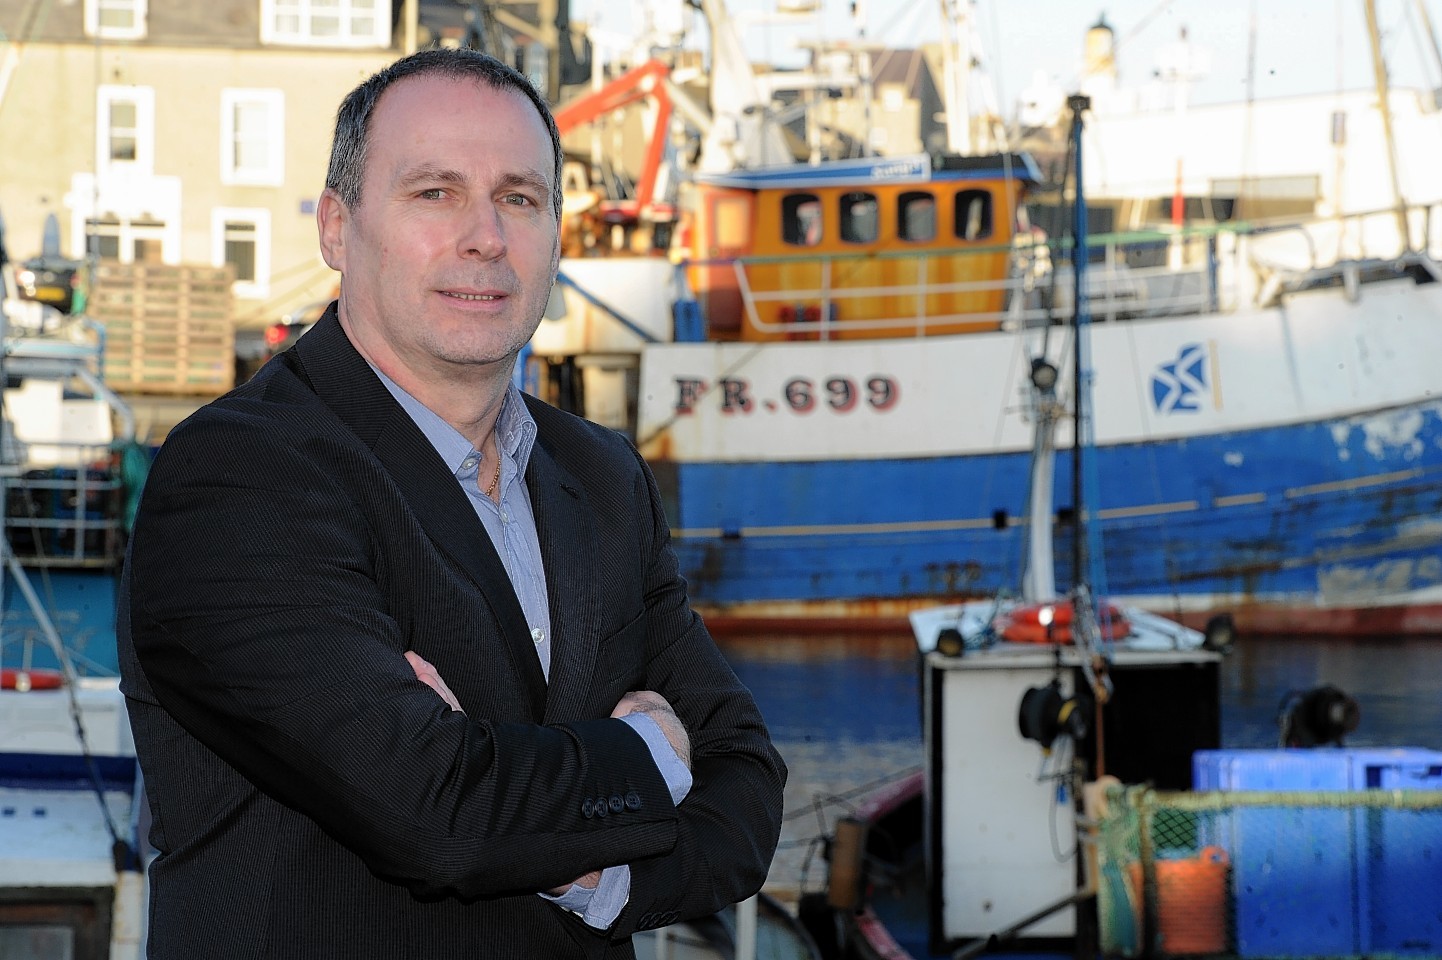 Scottish industry chief Mike Park now has a key role with Blue Fish